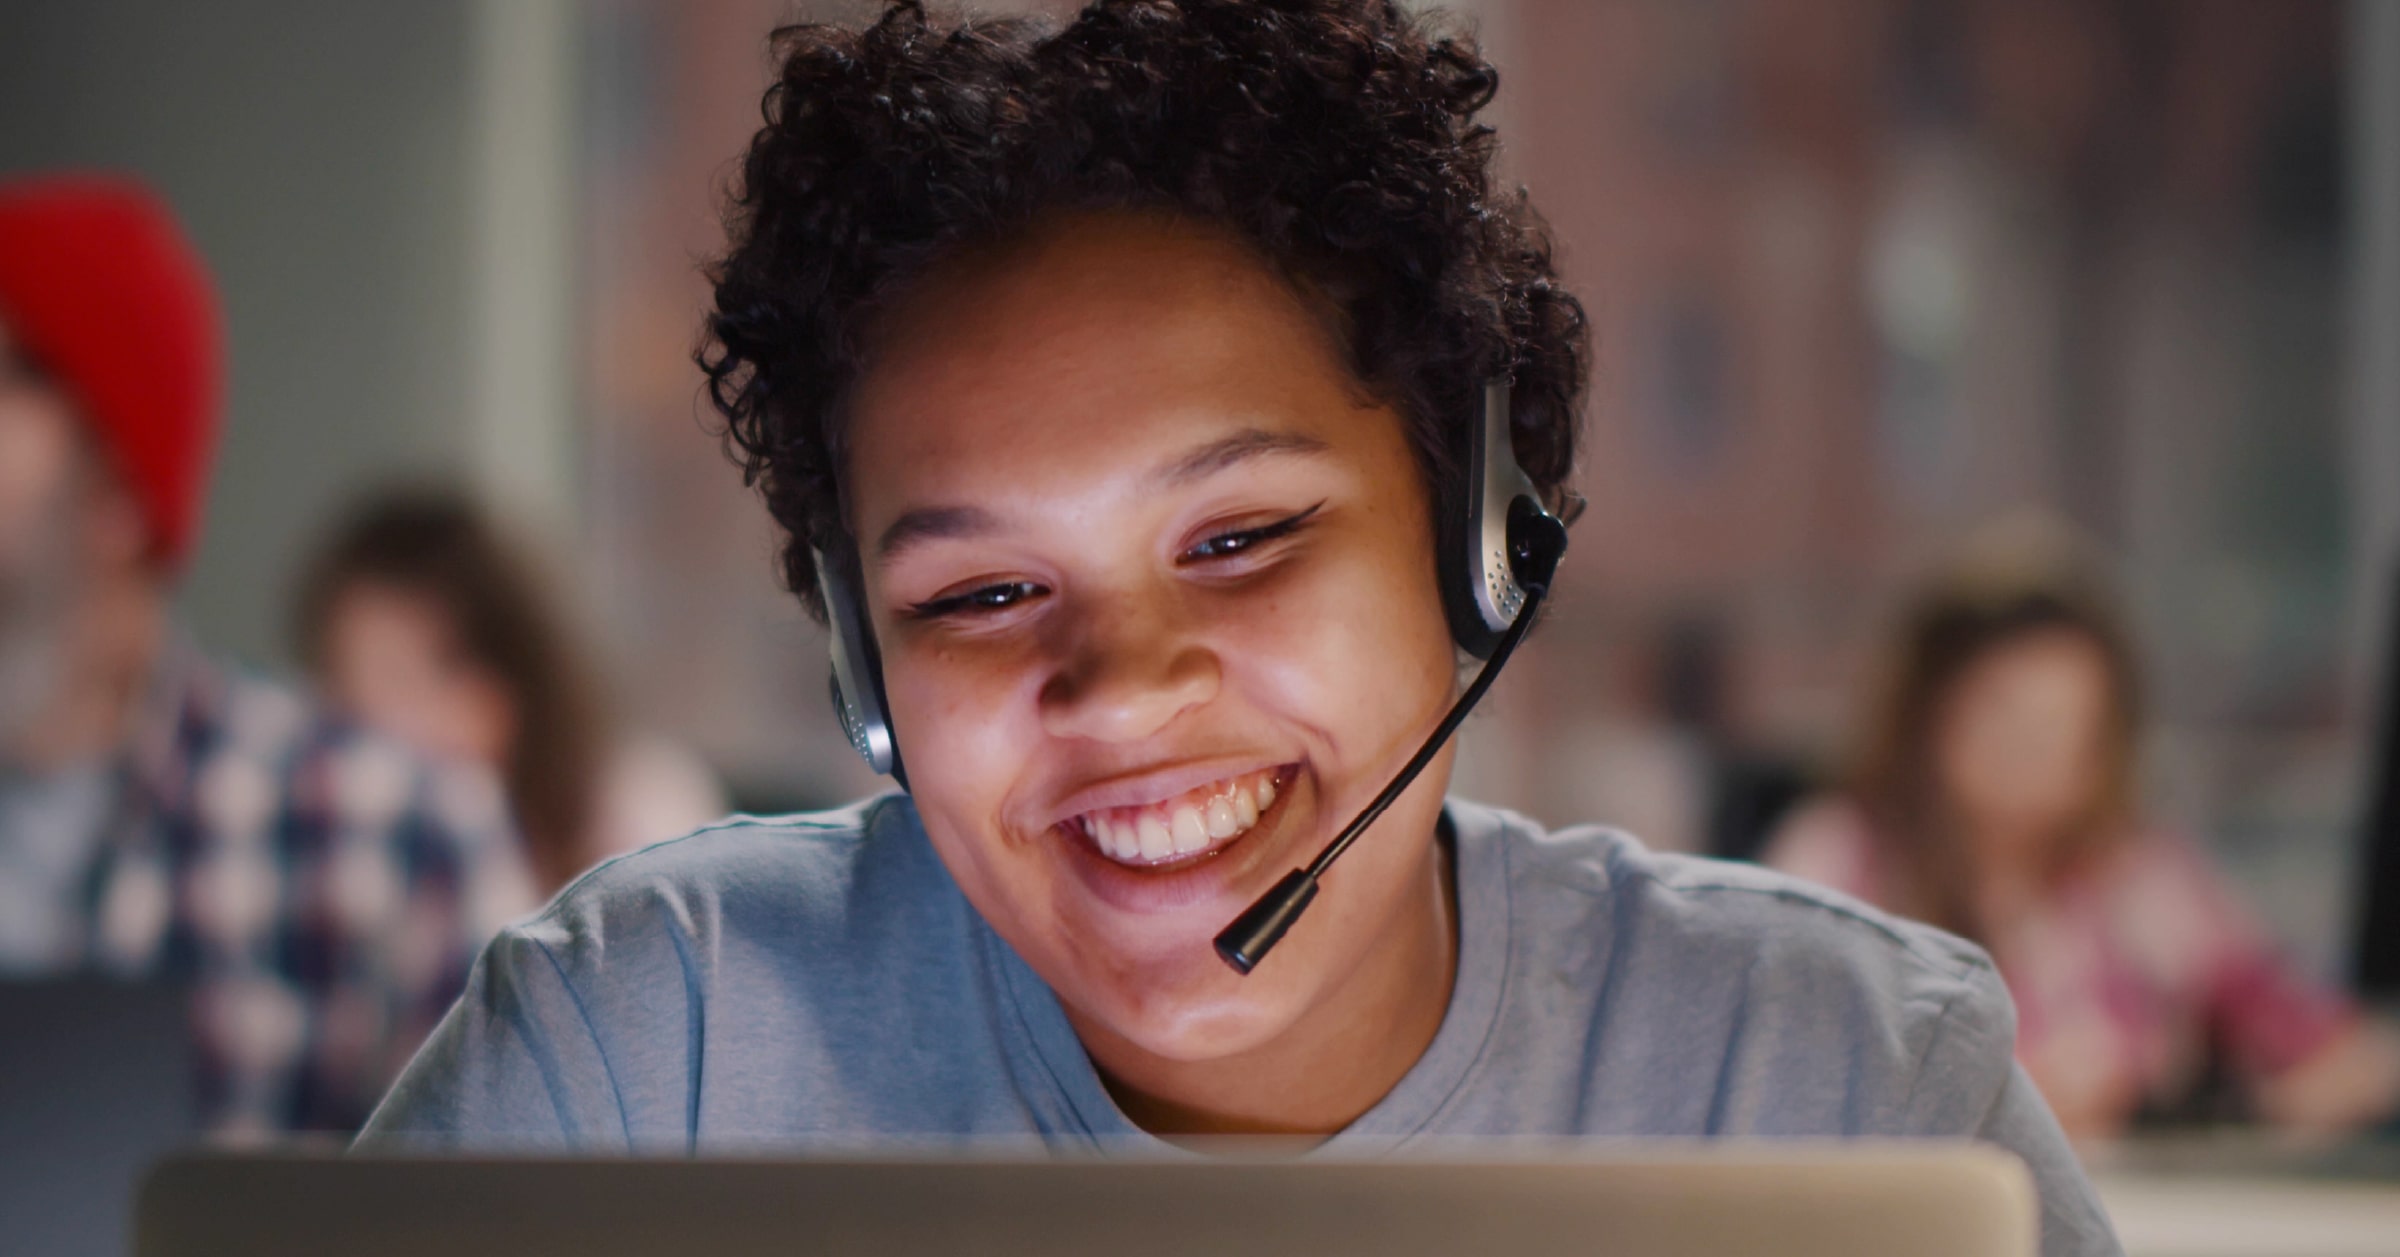 Lifesize Announces Enhancements to Cloud Contact Center Suite with Summer Release